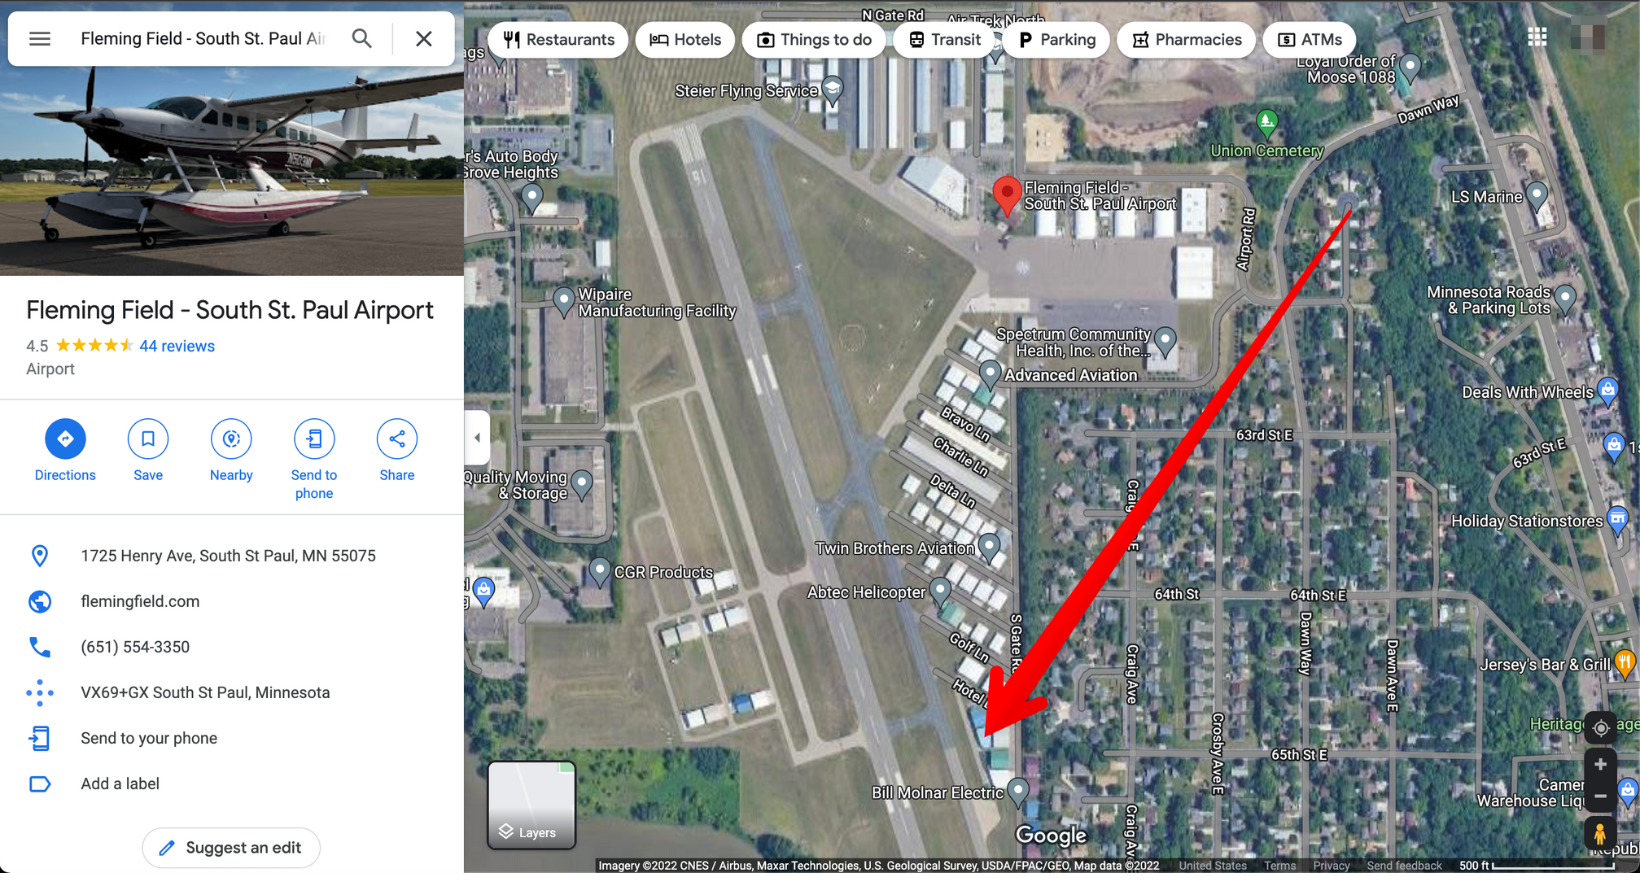 Fleming_Field_-_South_St._Paul_Airport_-_Google_Maps.png